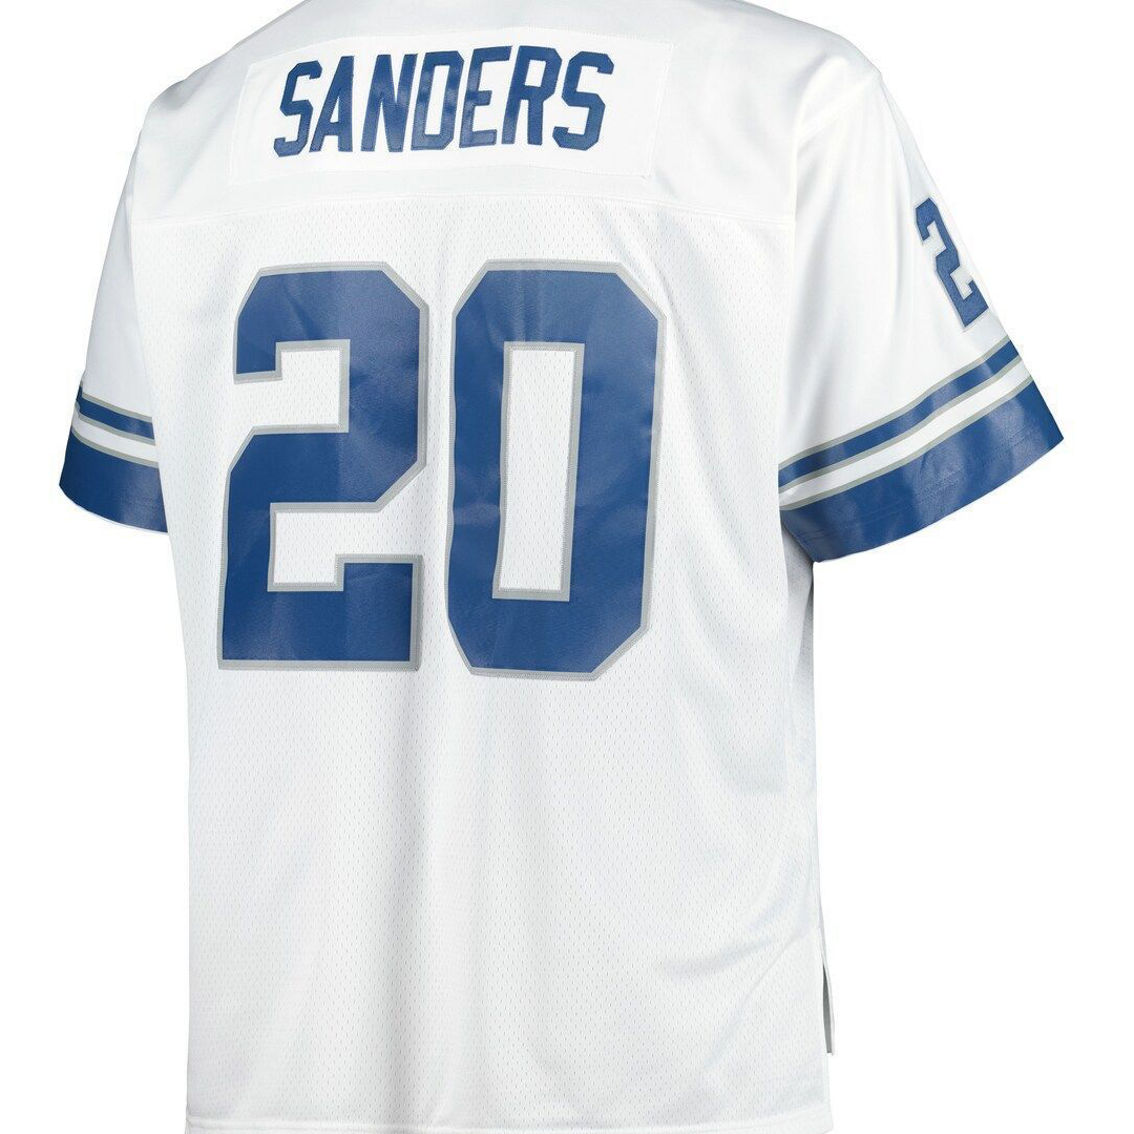 Mitchell & Ness Men's Barry Sanders White Detroit Lions Big & Tall 1996 Retired Player Replica Jersey - Image 4 of 4